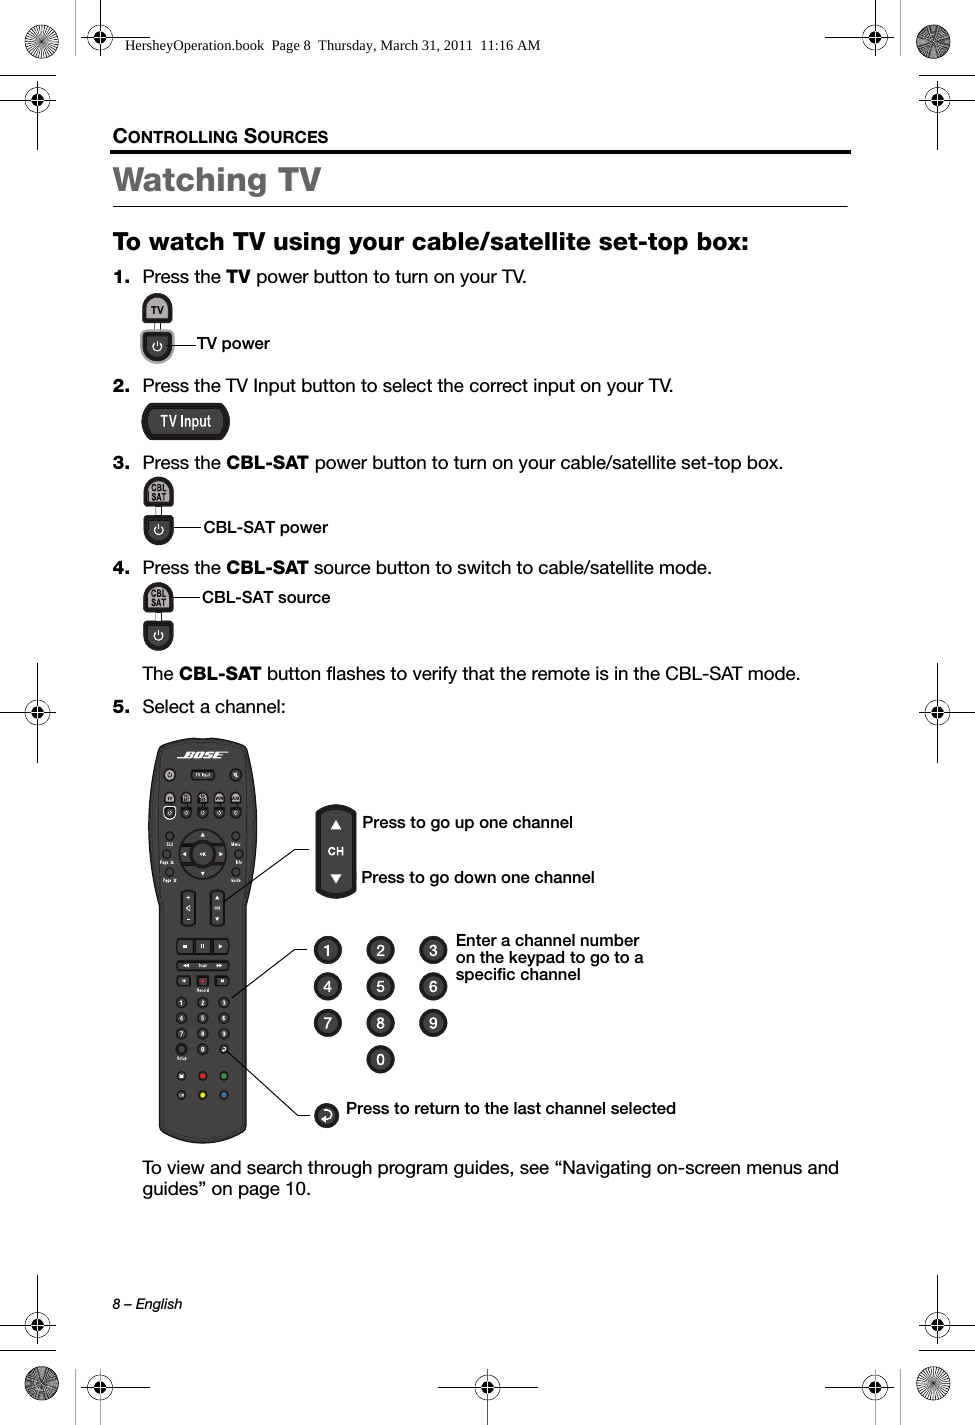 8 – EnglishCONTROLLING SOURCESWatching TV To watch TV using your cable/satellite set-top box:1. Press the TV power button to turn on your TV.2. Press the TV Input button to select the correct input on your TV.3. Press the CBL-SAT power button to turn on your cable/satellite set-top box.4. Press the CBL-SAT source button to switch to cable/satellite mode.The CBL-SAT button flashes to verify that the remote is in the CBL-SAT mode.5. Select a channel:To view and search through program guides, see “Navigating on-screen menus and guides” on page 10.TV powerCBL-SAT powerCBL-SAT sourcePress to return to the last channel selectedEnter a channel number on the keypad to go to a specific channelPress to go down one channelPress to go up one channelHersheyOperation.book  Page 8  Thursday, March 31, 2011  11:16 AM